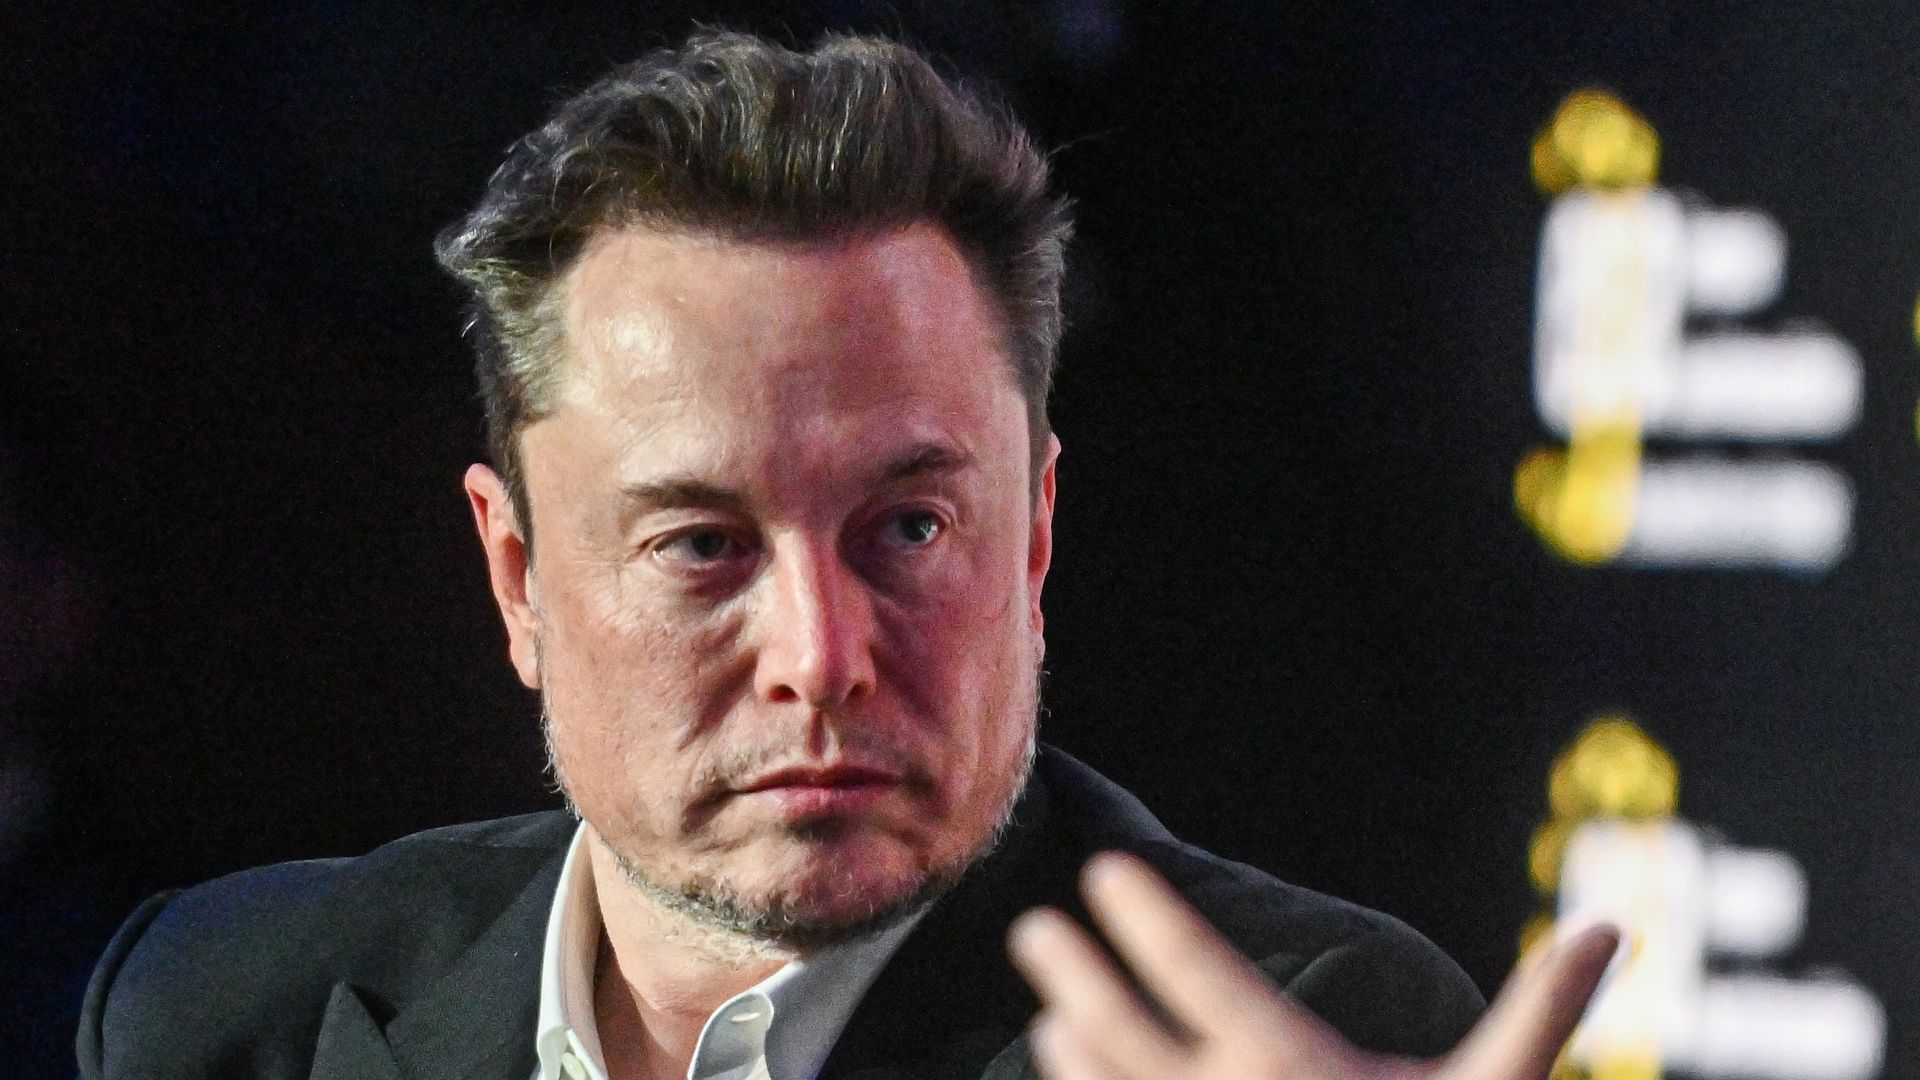 SpaceX, X (formerly known as Twitter), and Tesla CEO Elon Musk speaks during live interview with Ben Shapiro at the symposium on fighting antisemitism on January 22, 2024 in Krakow, Poland. 